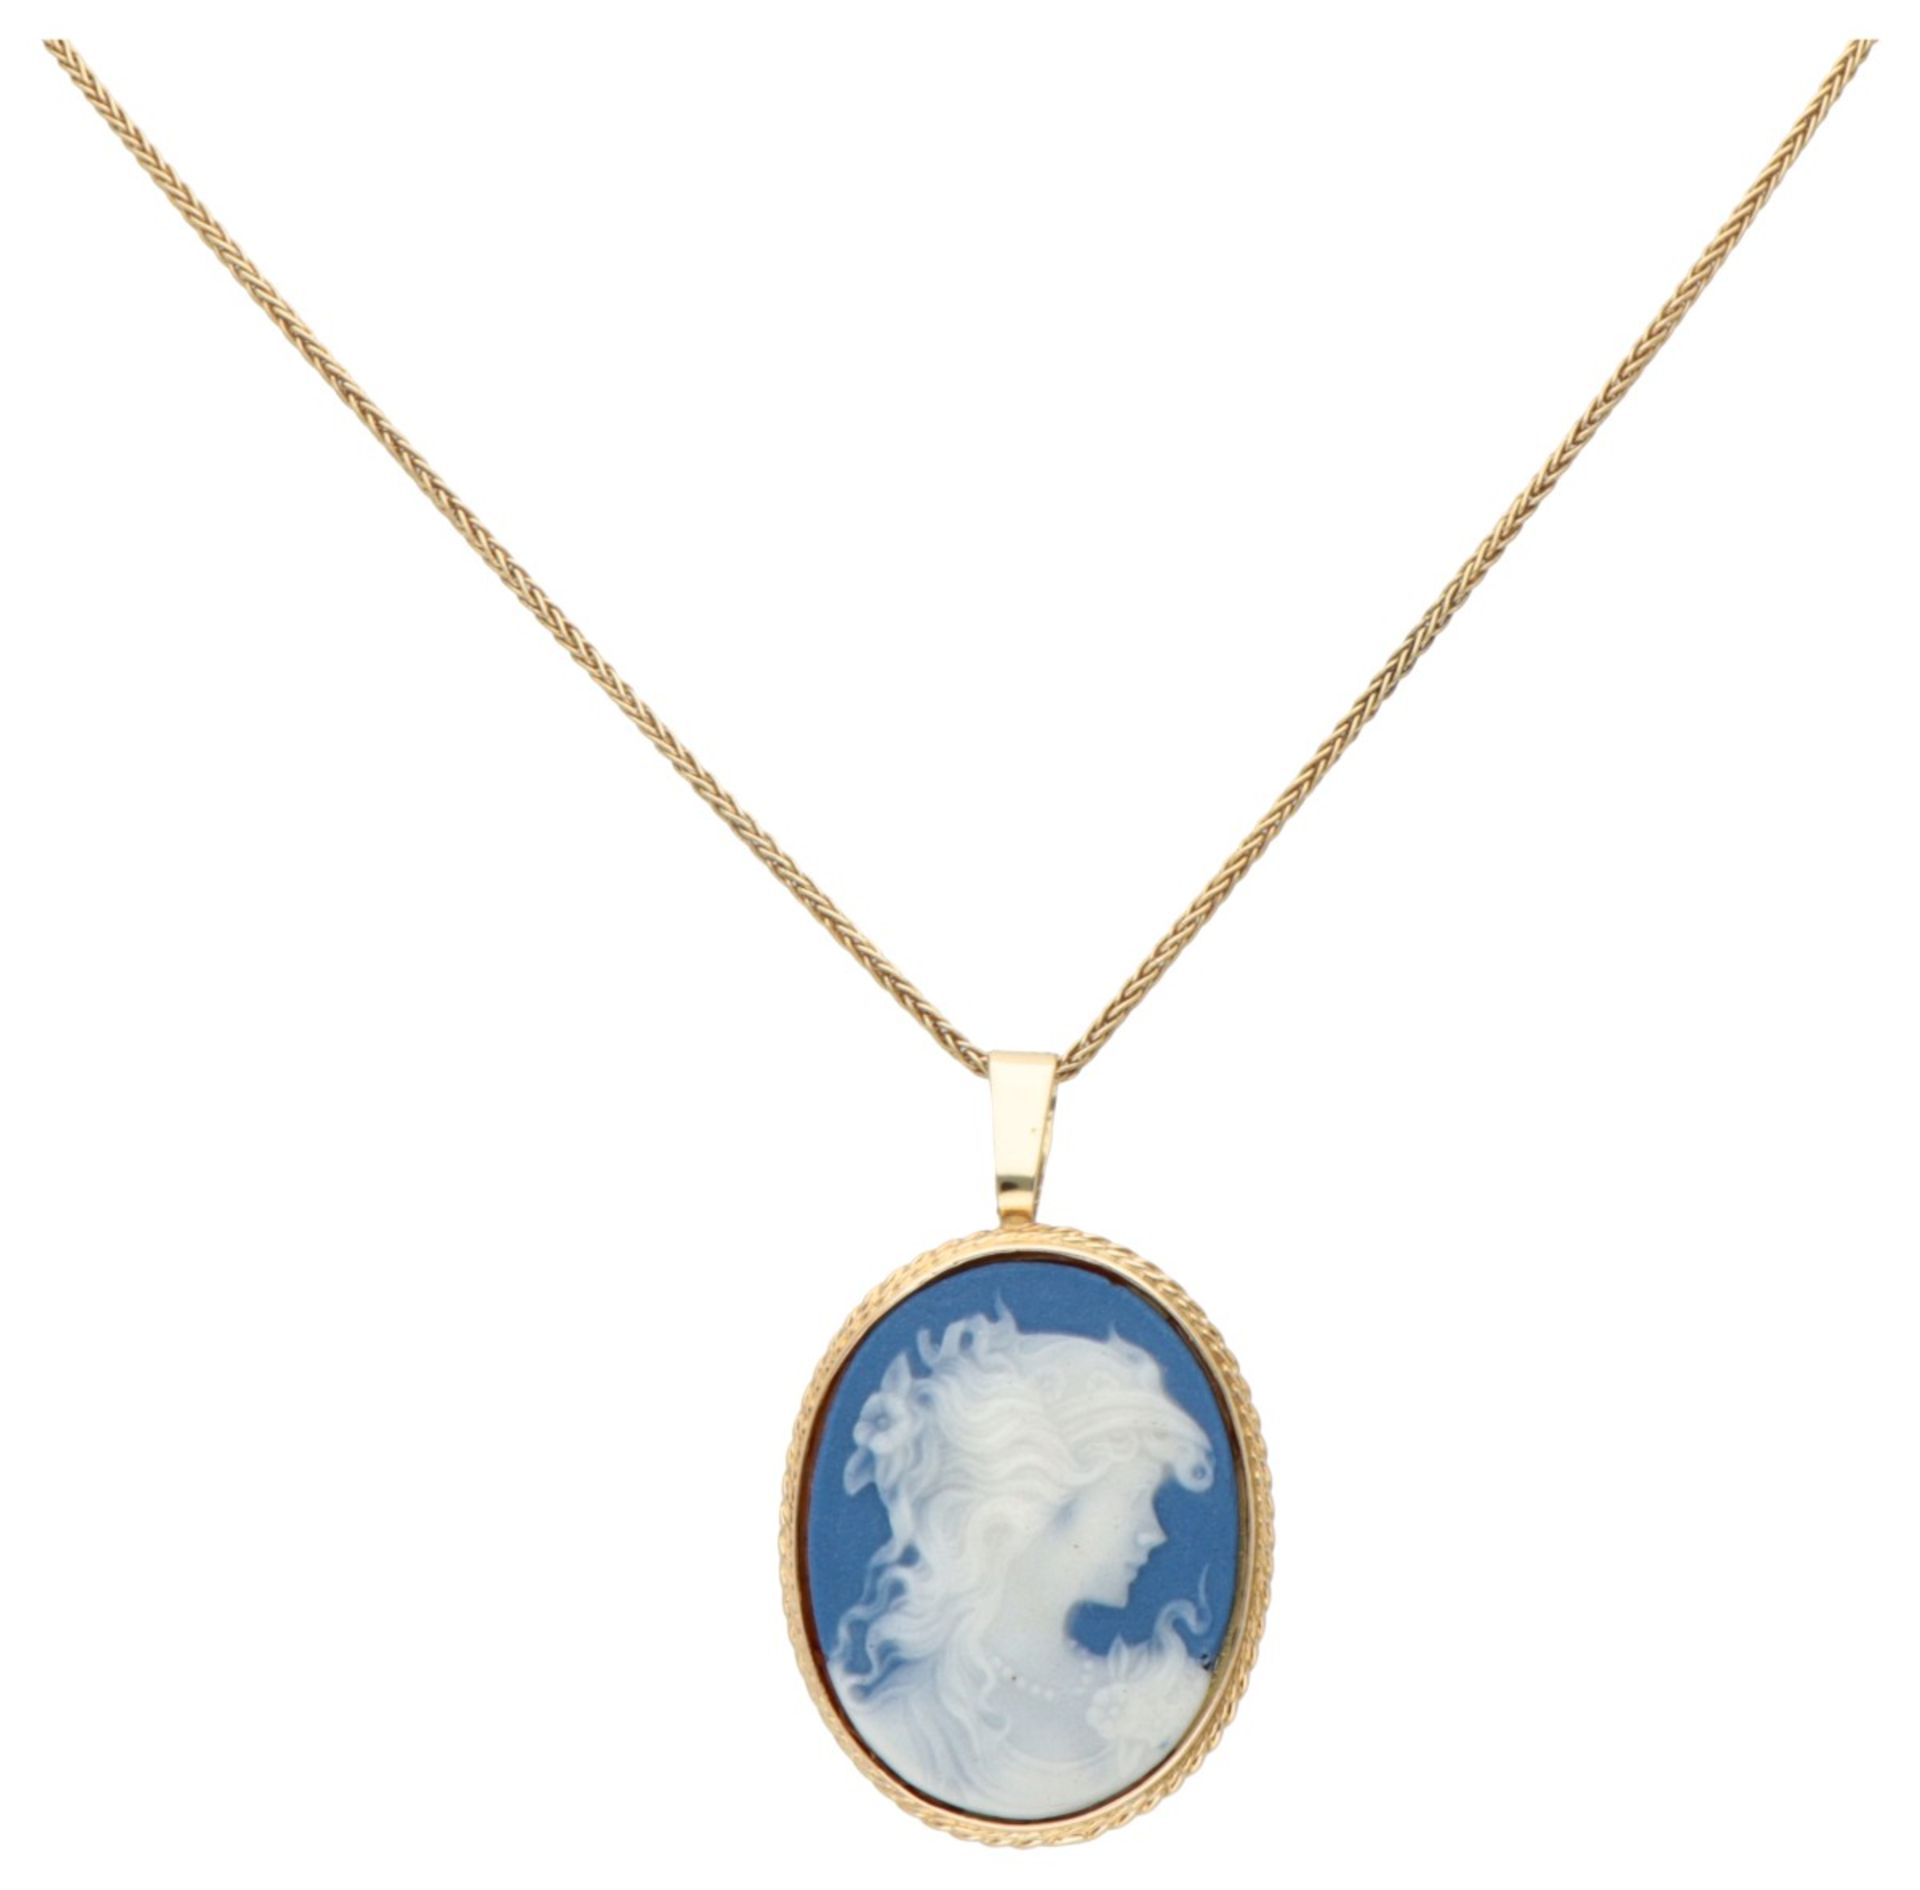 Vintage 18K. yellow gold necklace with pendant set with a blue cameo with a profile portrait of a la